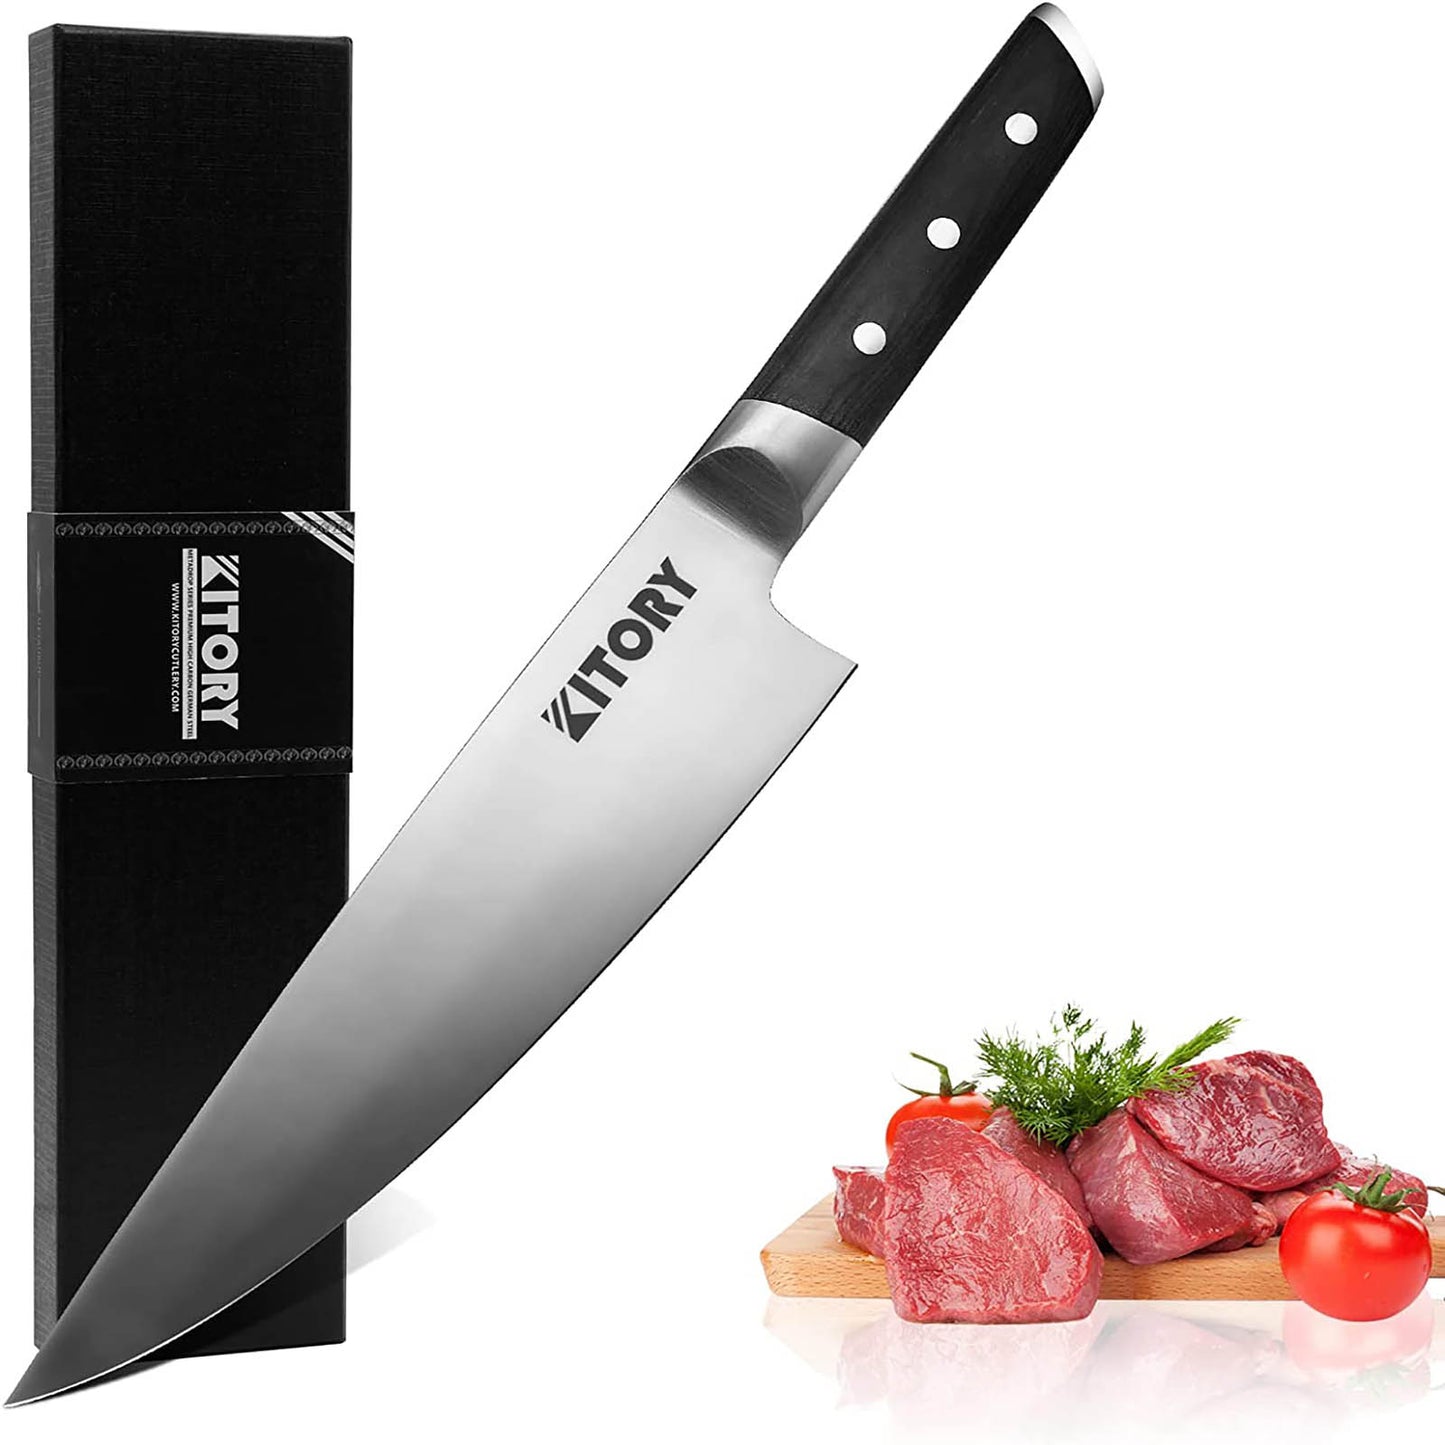 GrandMesser Chef Knife 8 inch, High Carbon Stainless Steel Cooking Knife with Ergonomic Pakkawood Handle, Kitchen Knife with Gift Box.